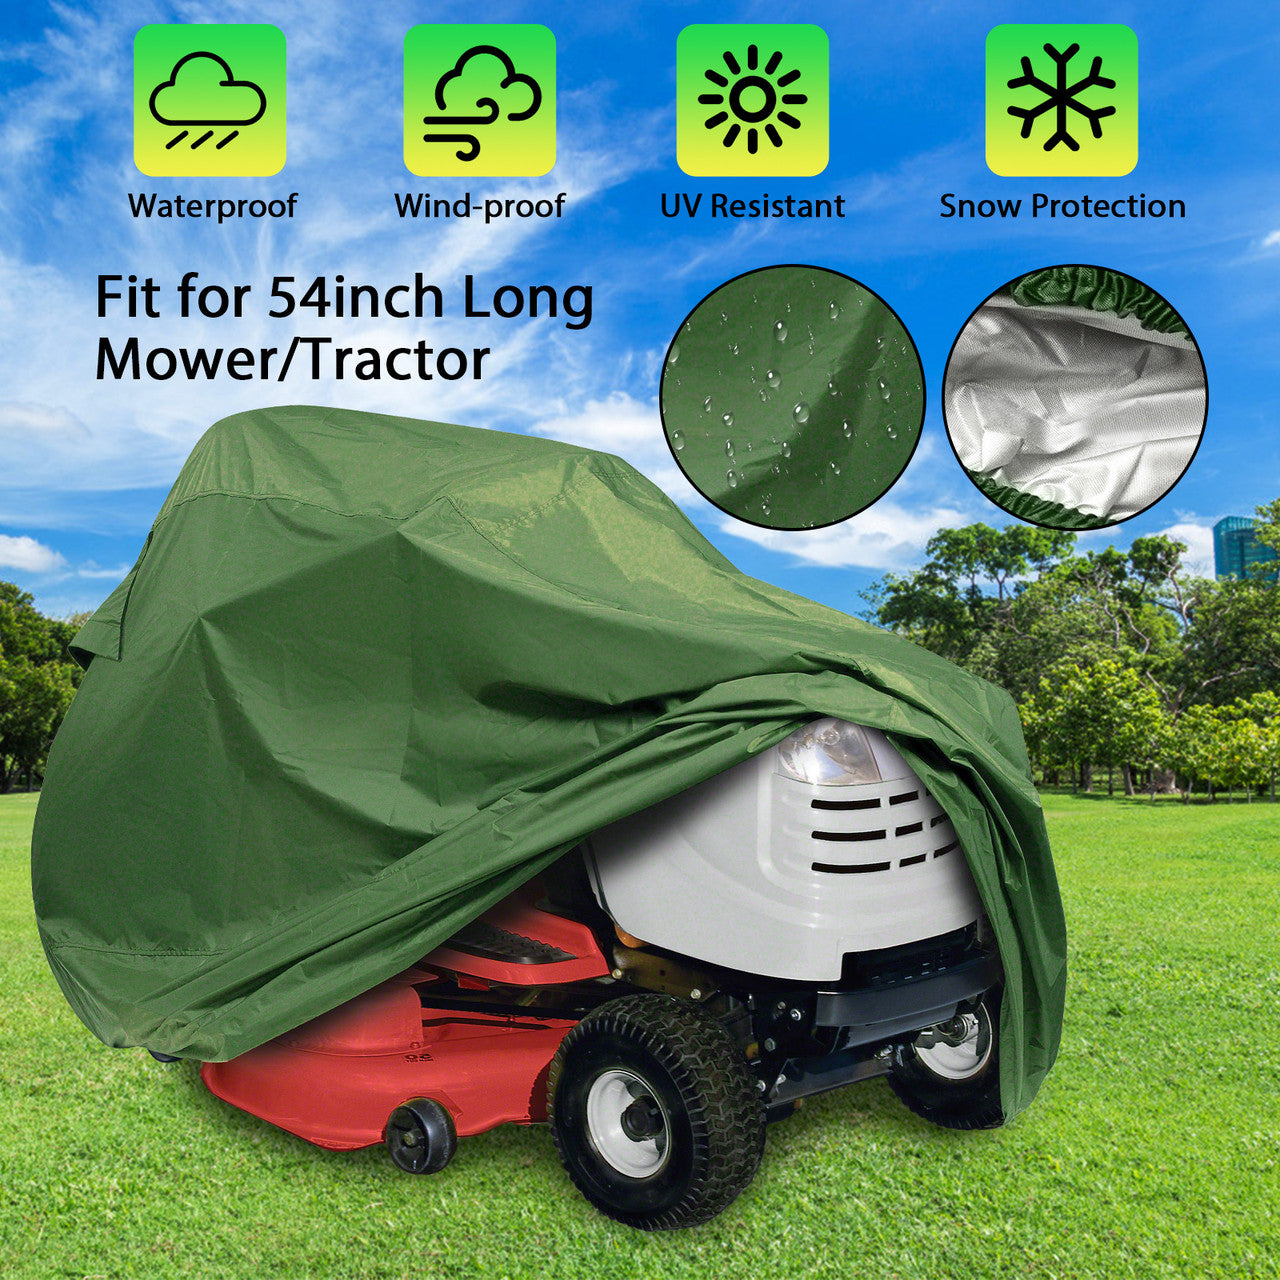 Heavy Duty Waterproof Tractor Lawn Mower Protective Cover Riding Garden Outdoor